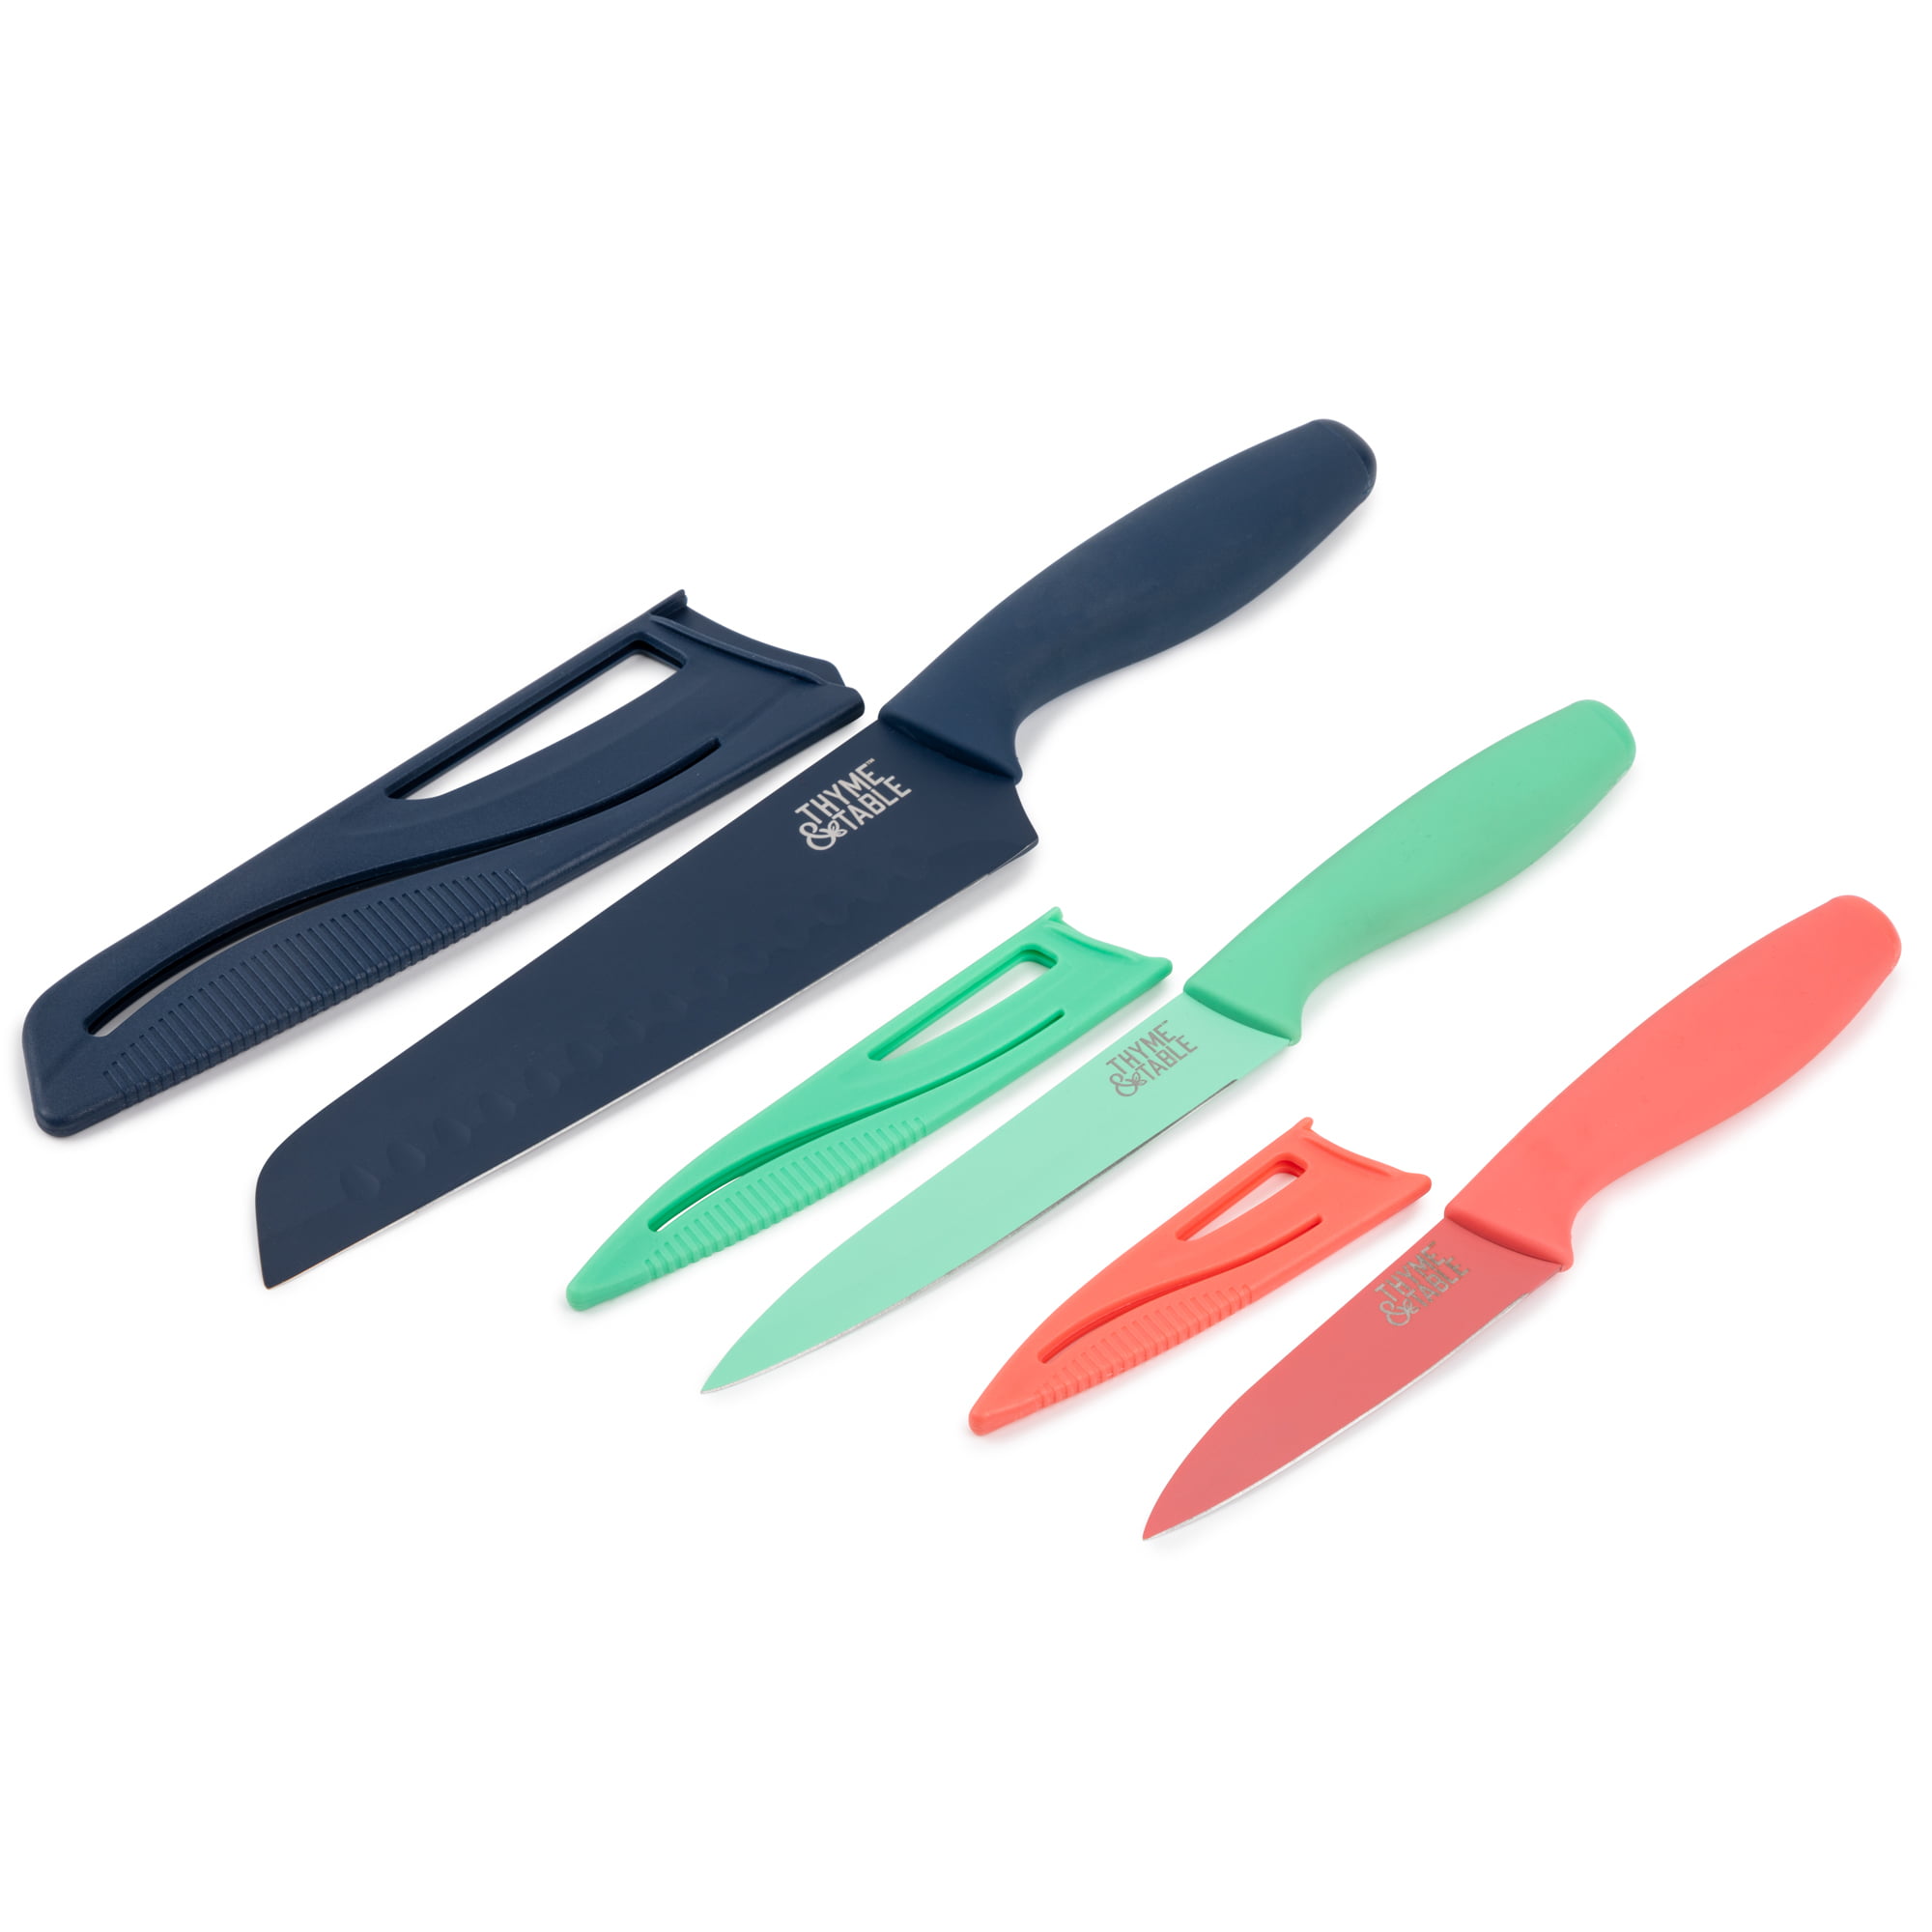 thyme and table 3 pc knife set review｜TikTok Search